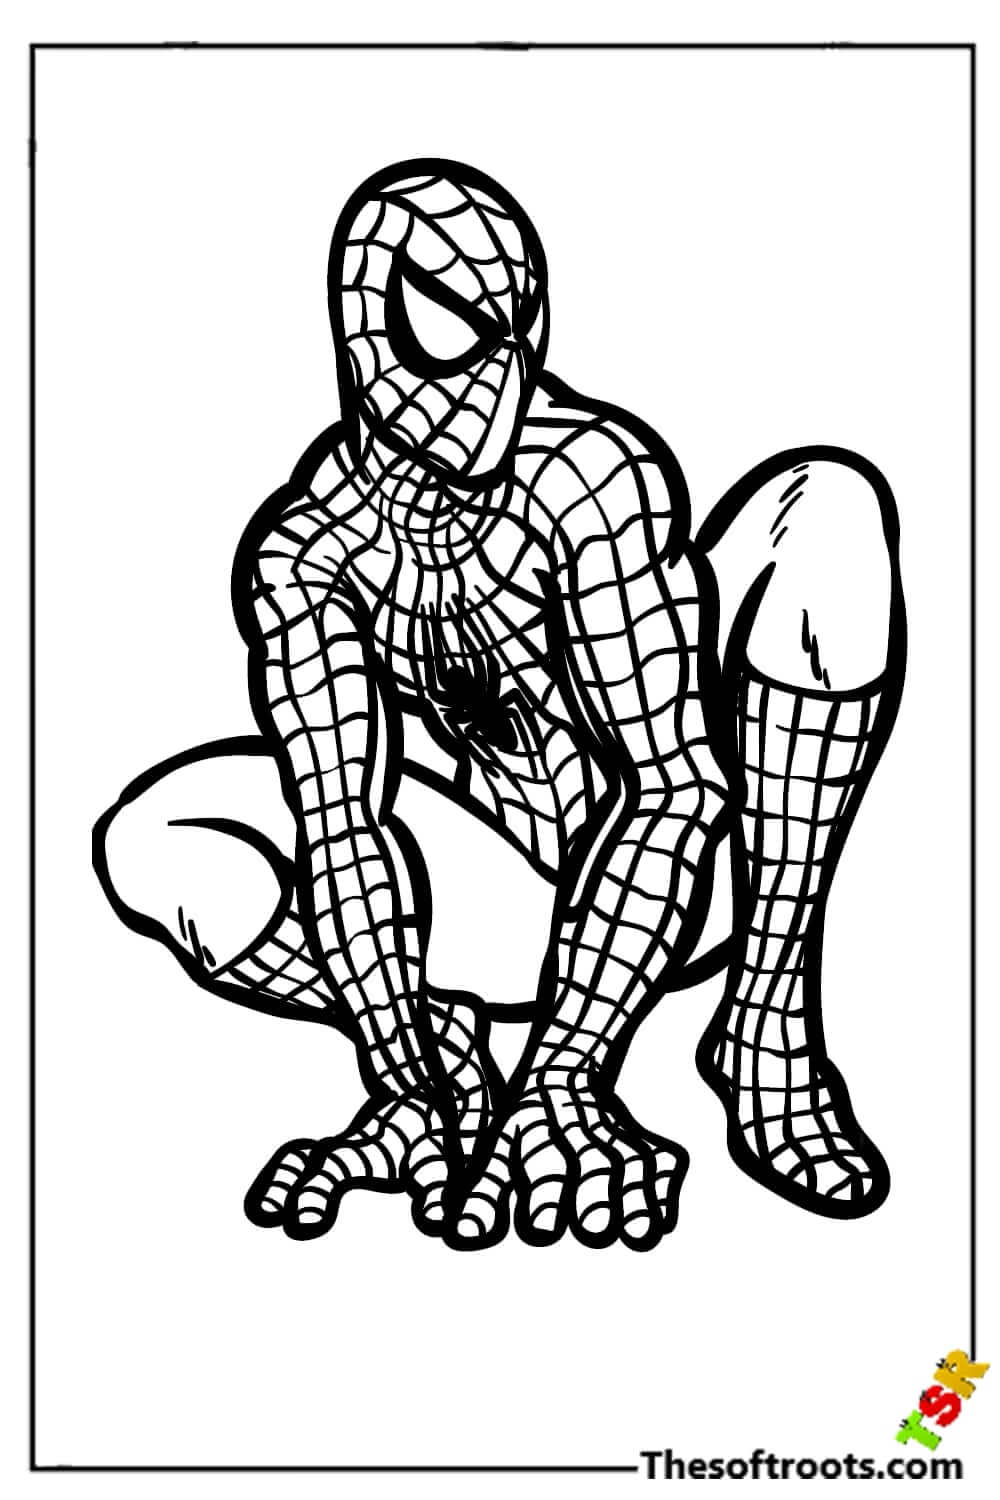 Black Spiderman coloring pages